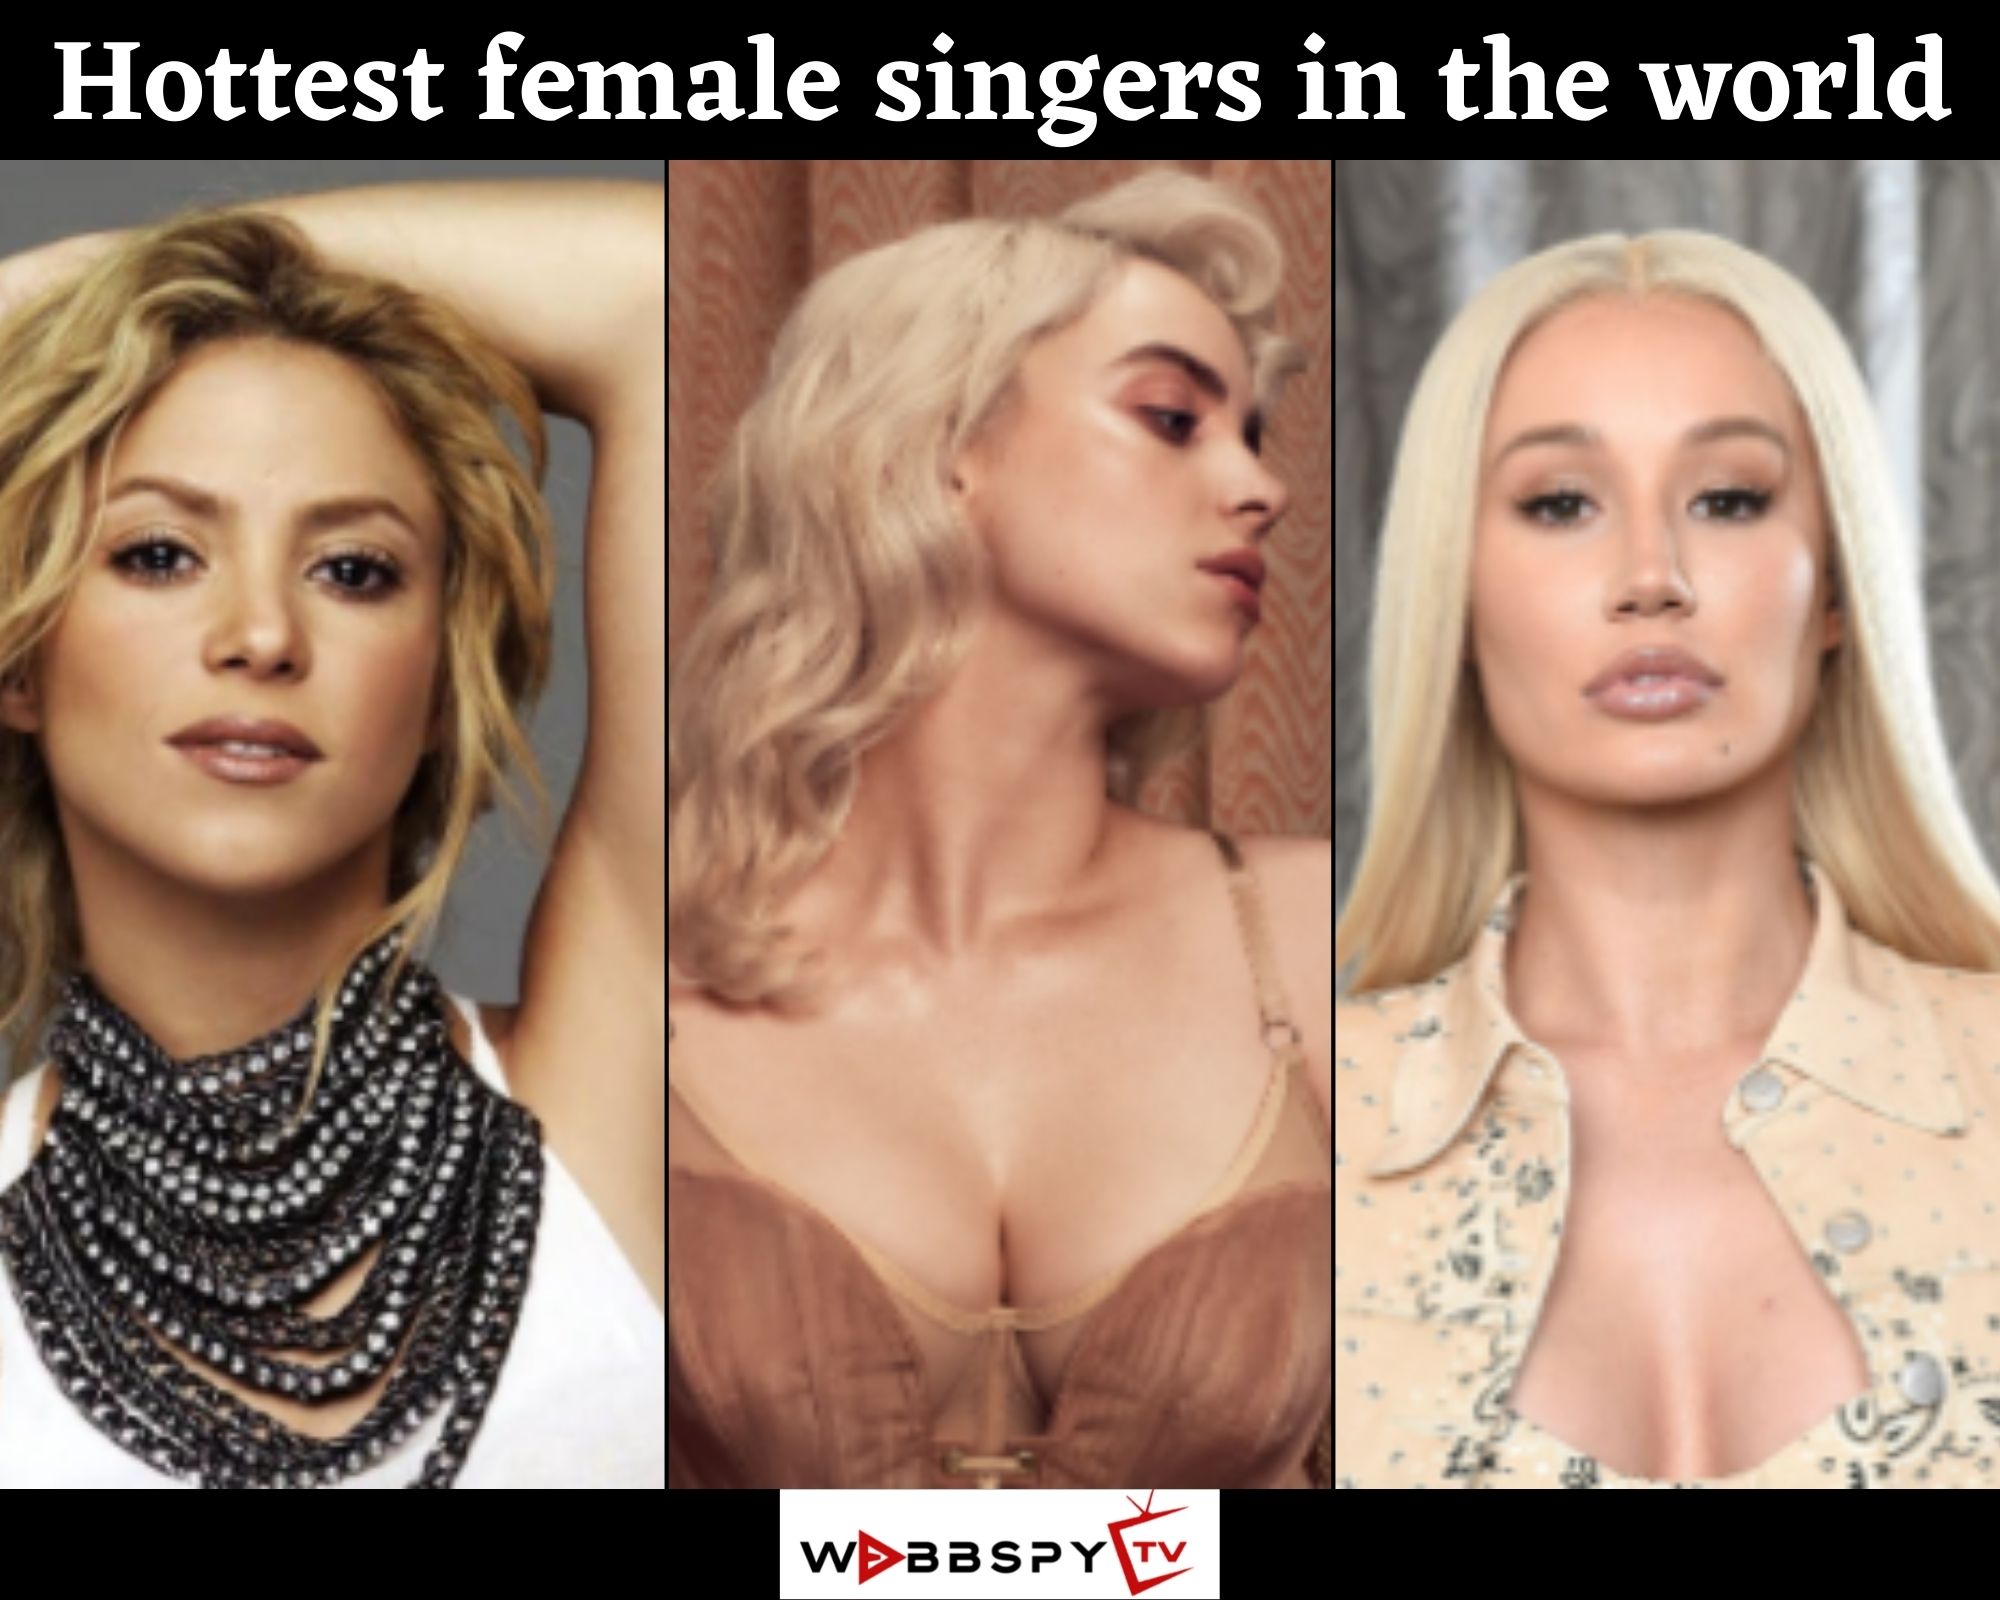 Top 10 Hottest female singers in the world 2021